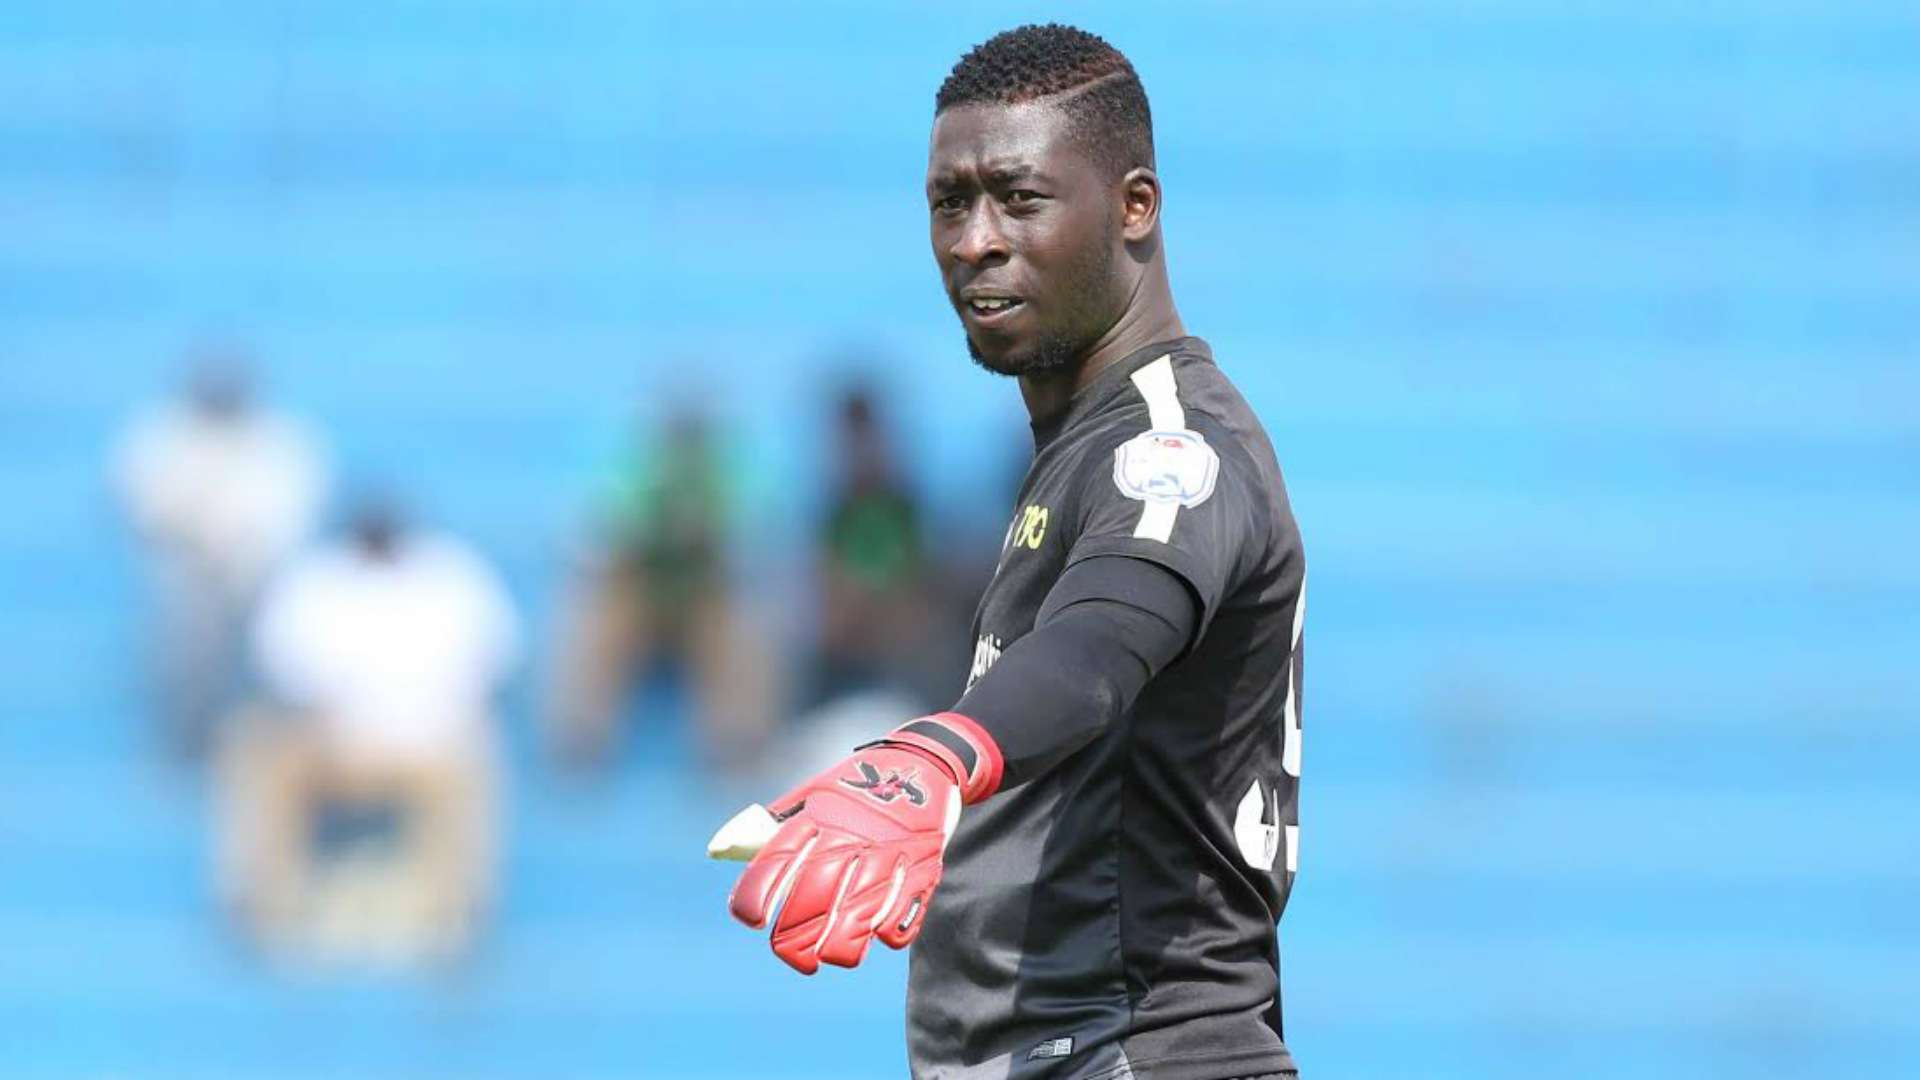 Muhoroni Youth keeper Farouk Shikhalo pulled a man of the match display with top class saves